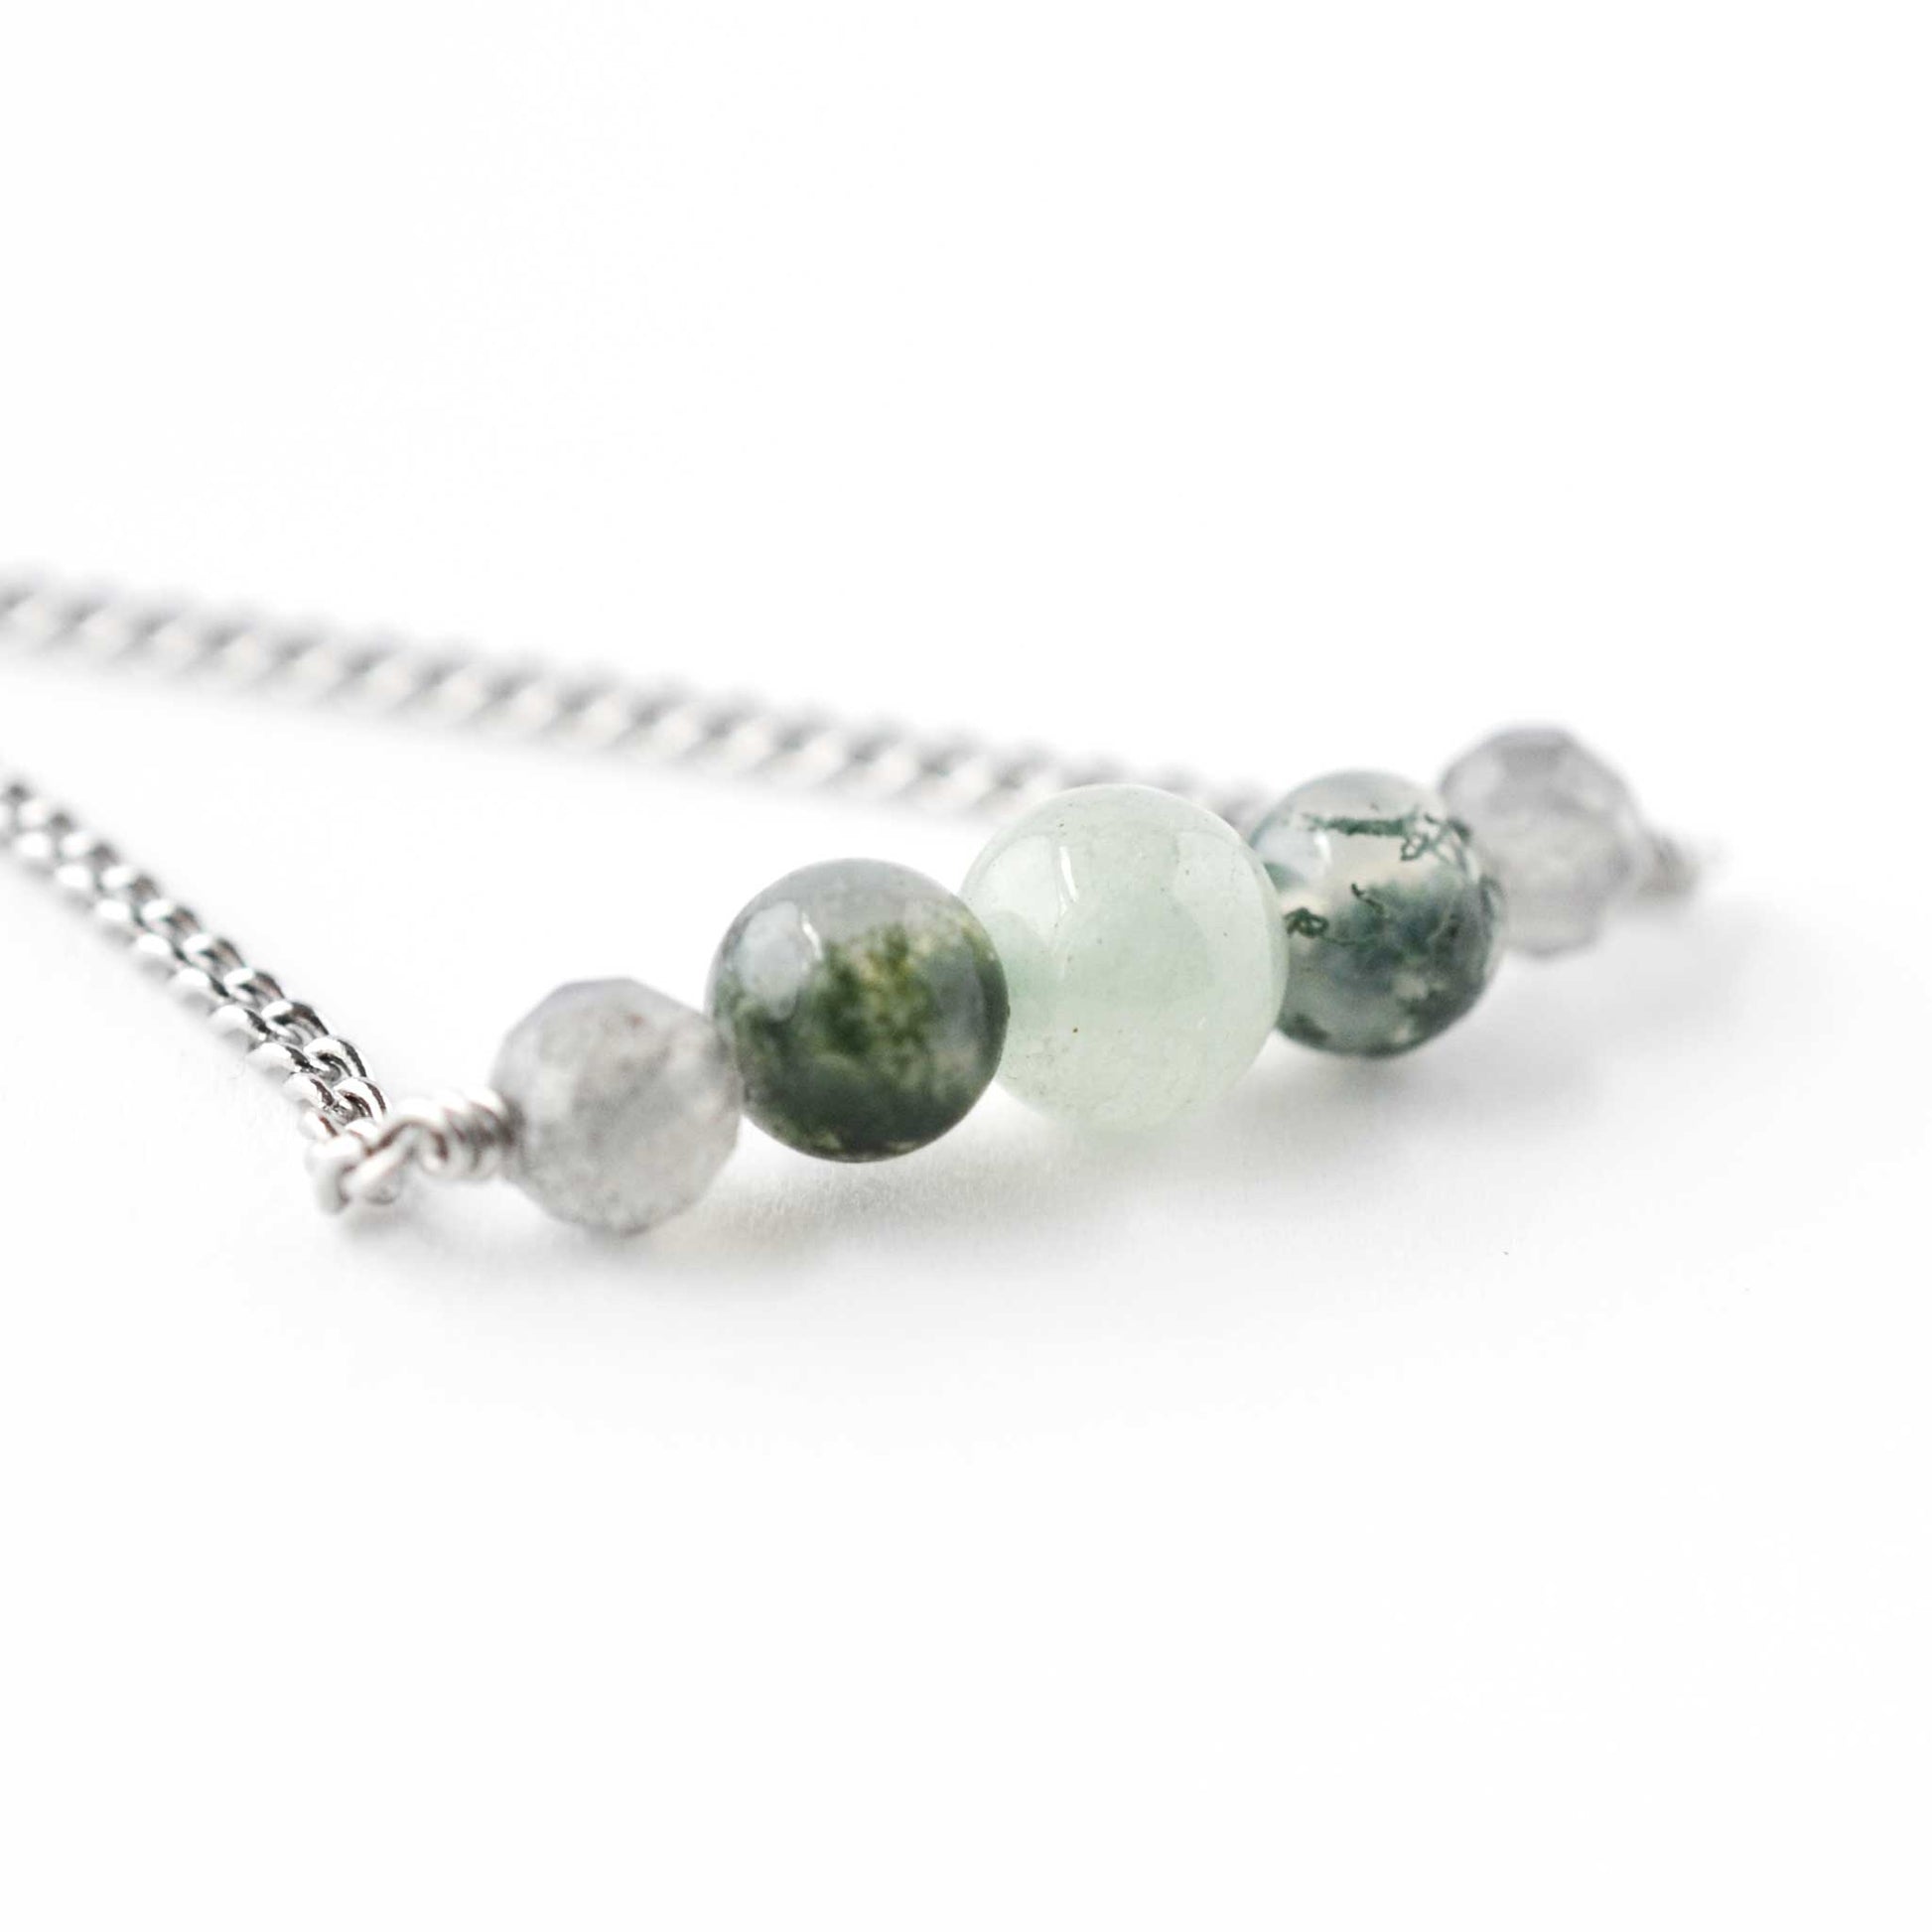 Close up of Labradorite, Moss Agate & Green Aventurine gemstone beads on stainless steel necklace